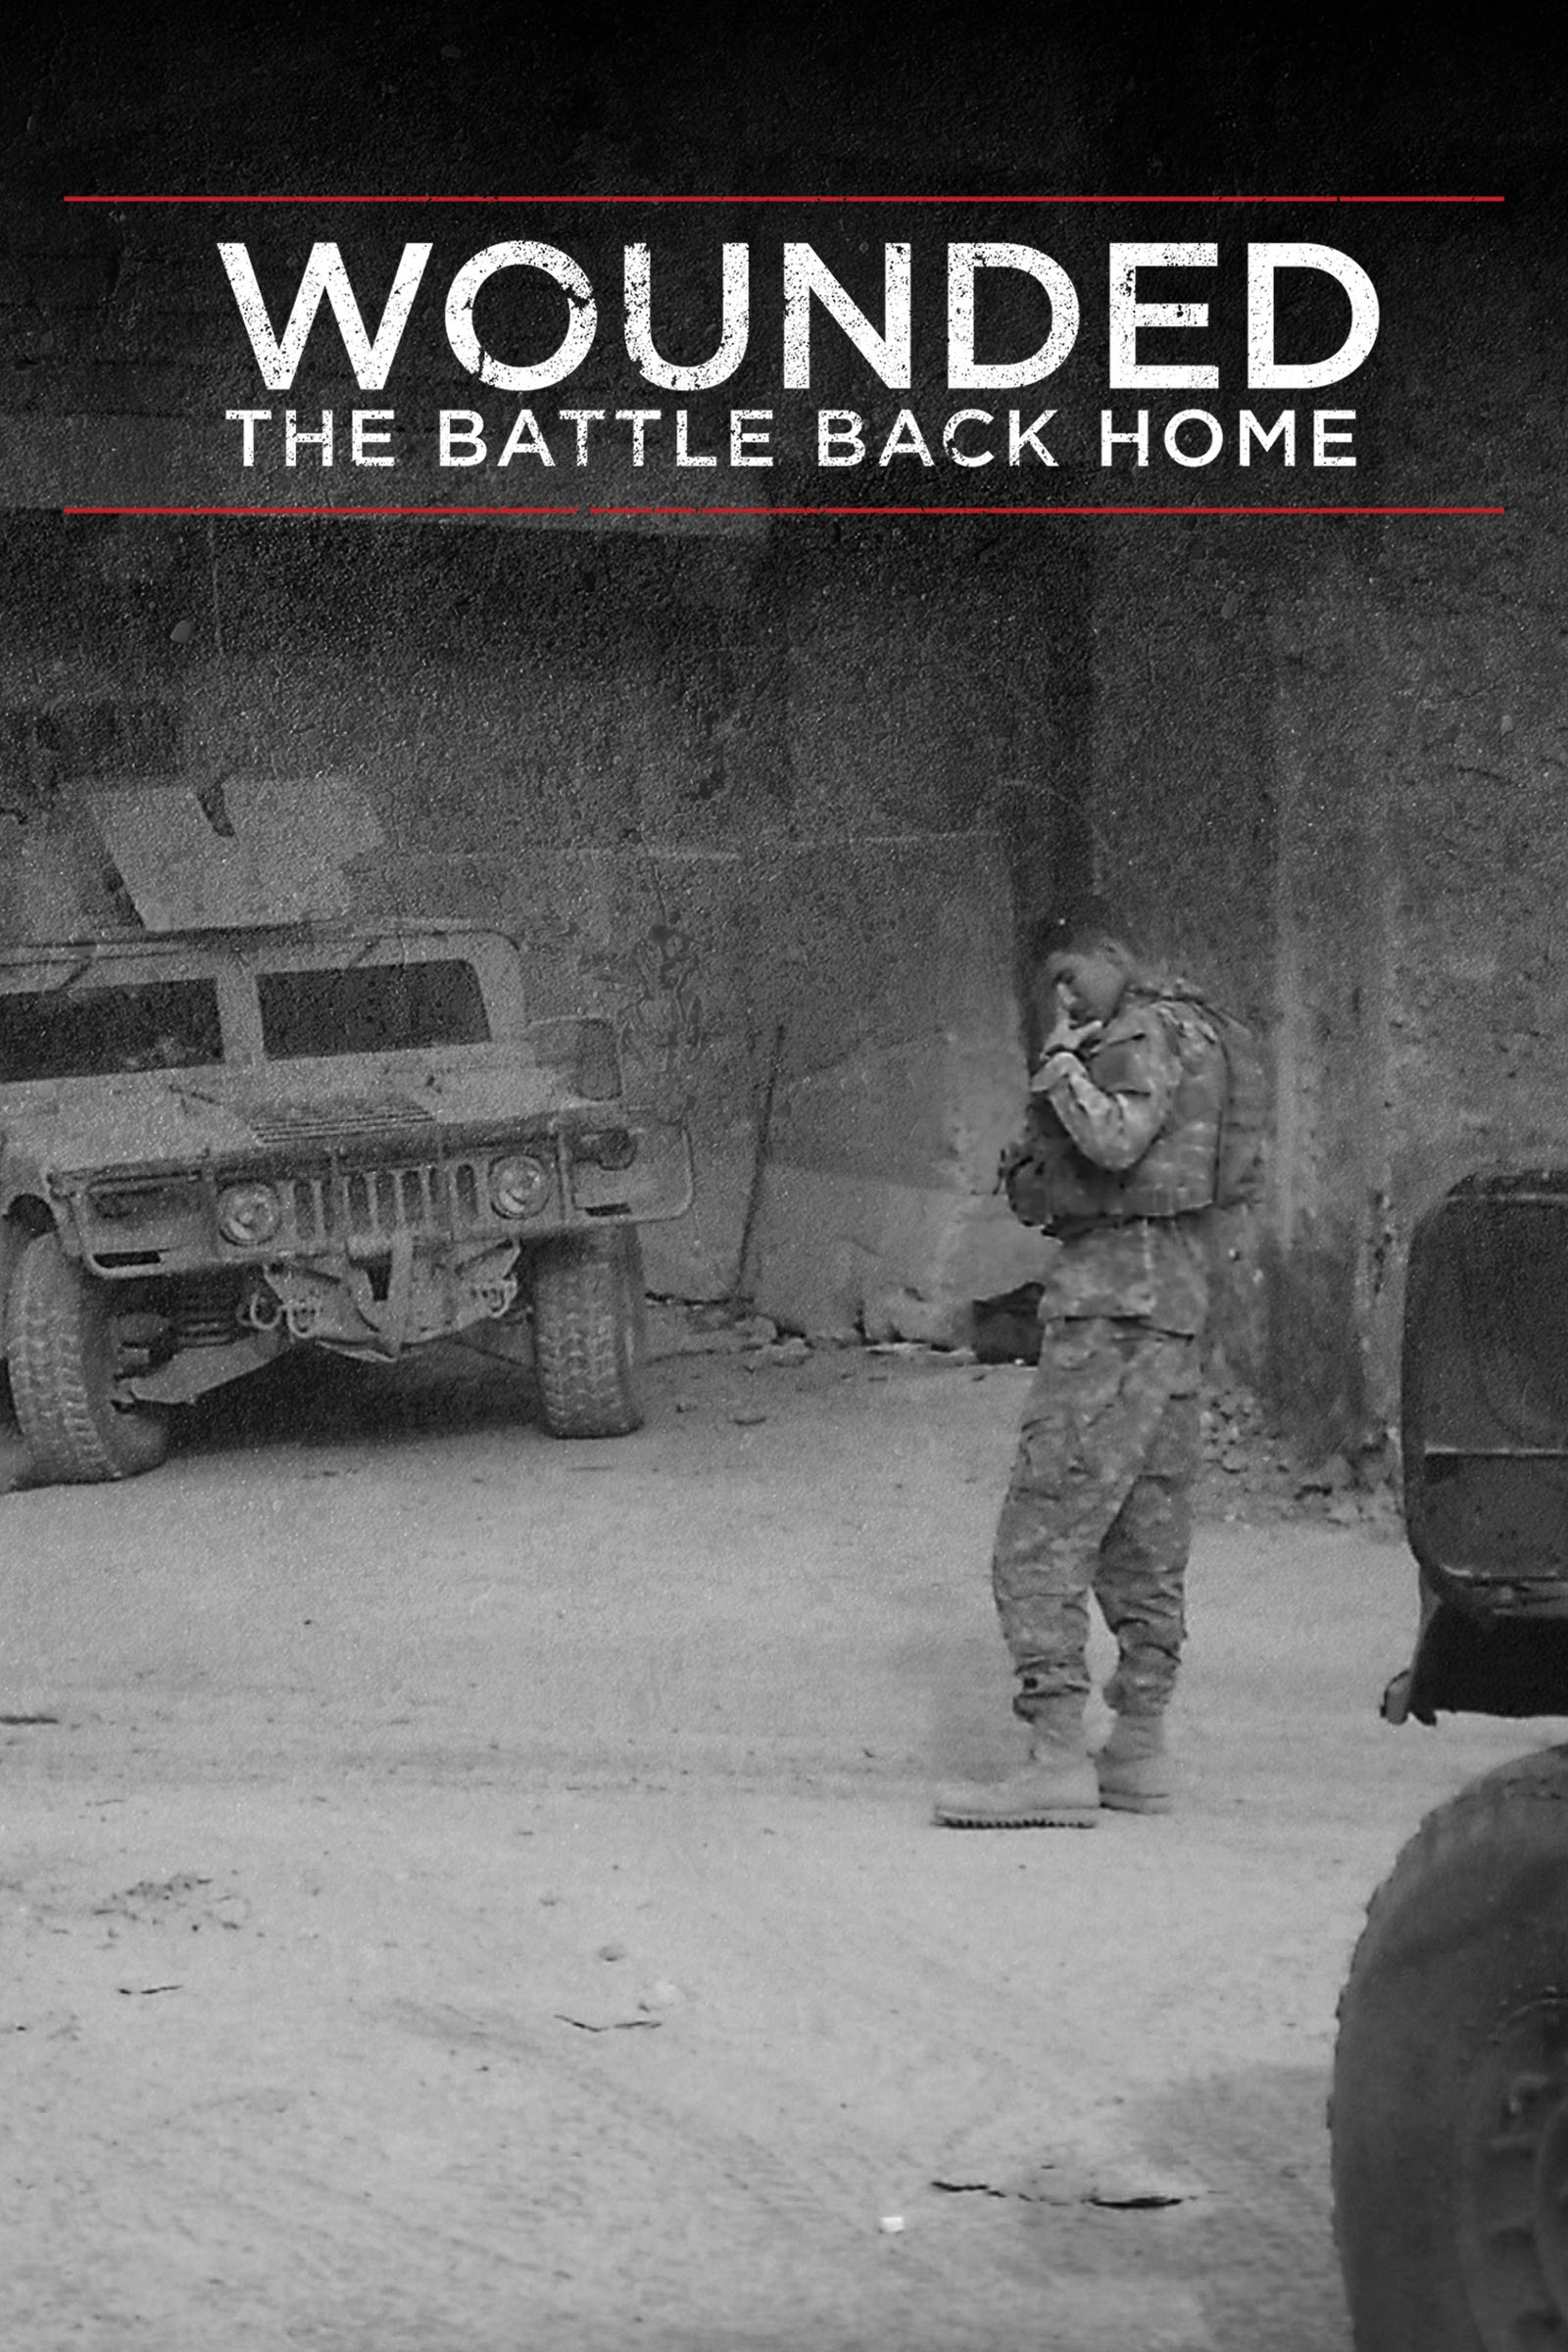 Where to stream Wounded: The Battle Back Home